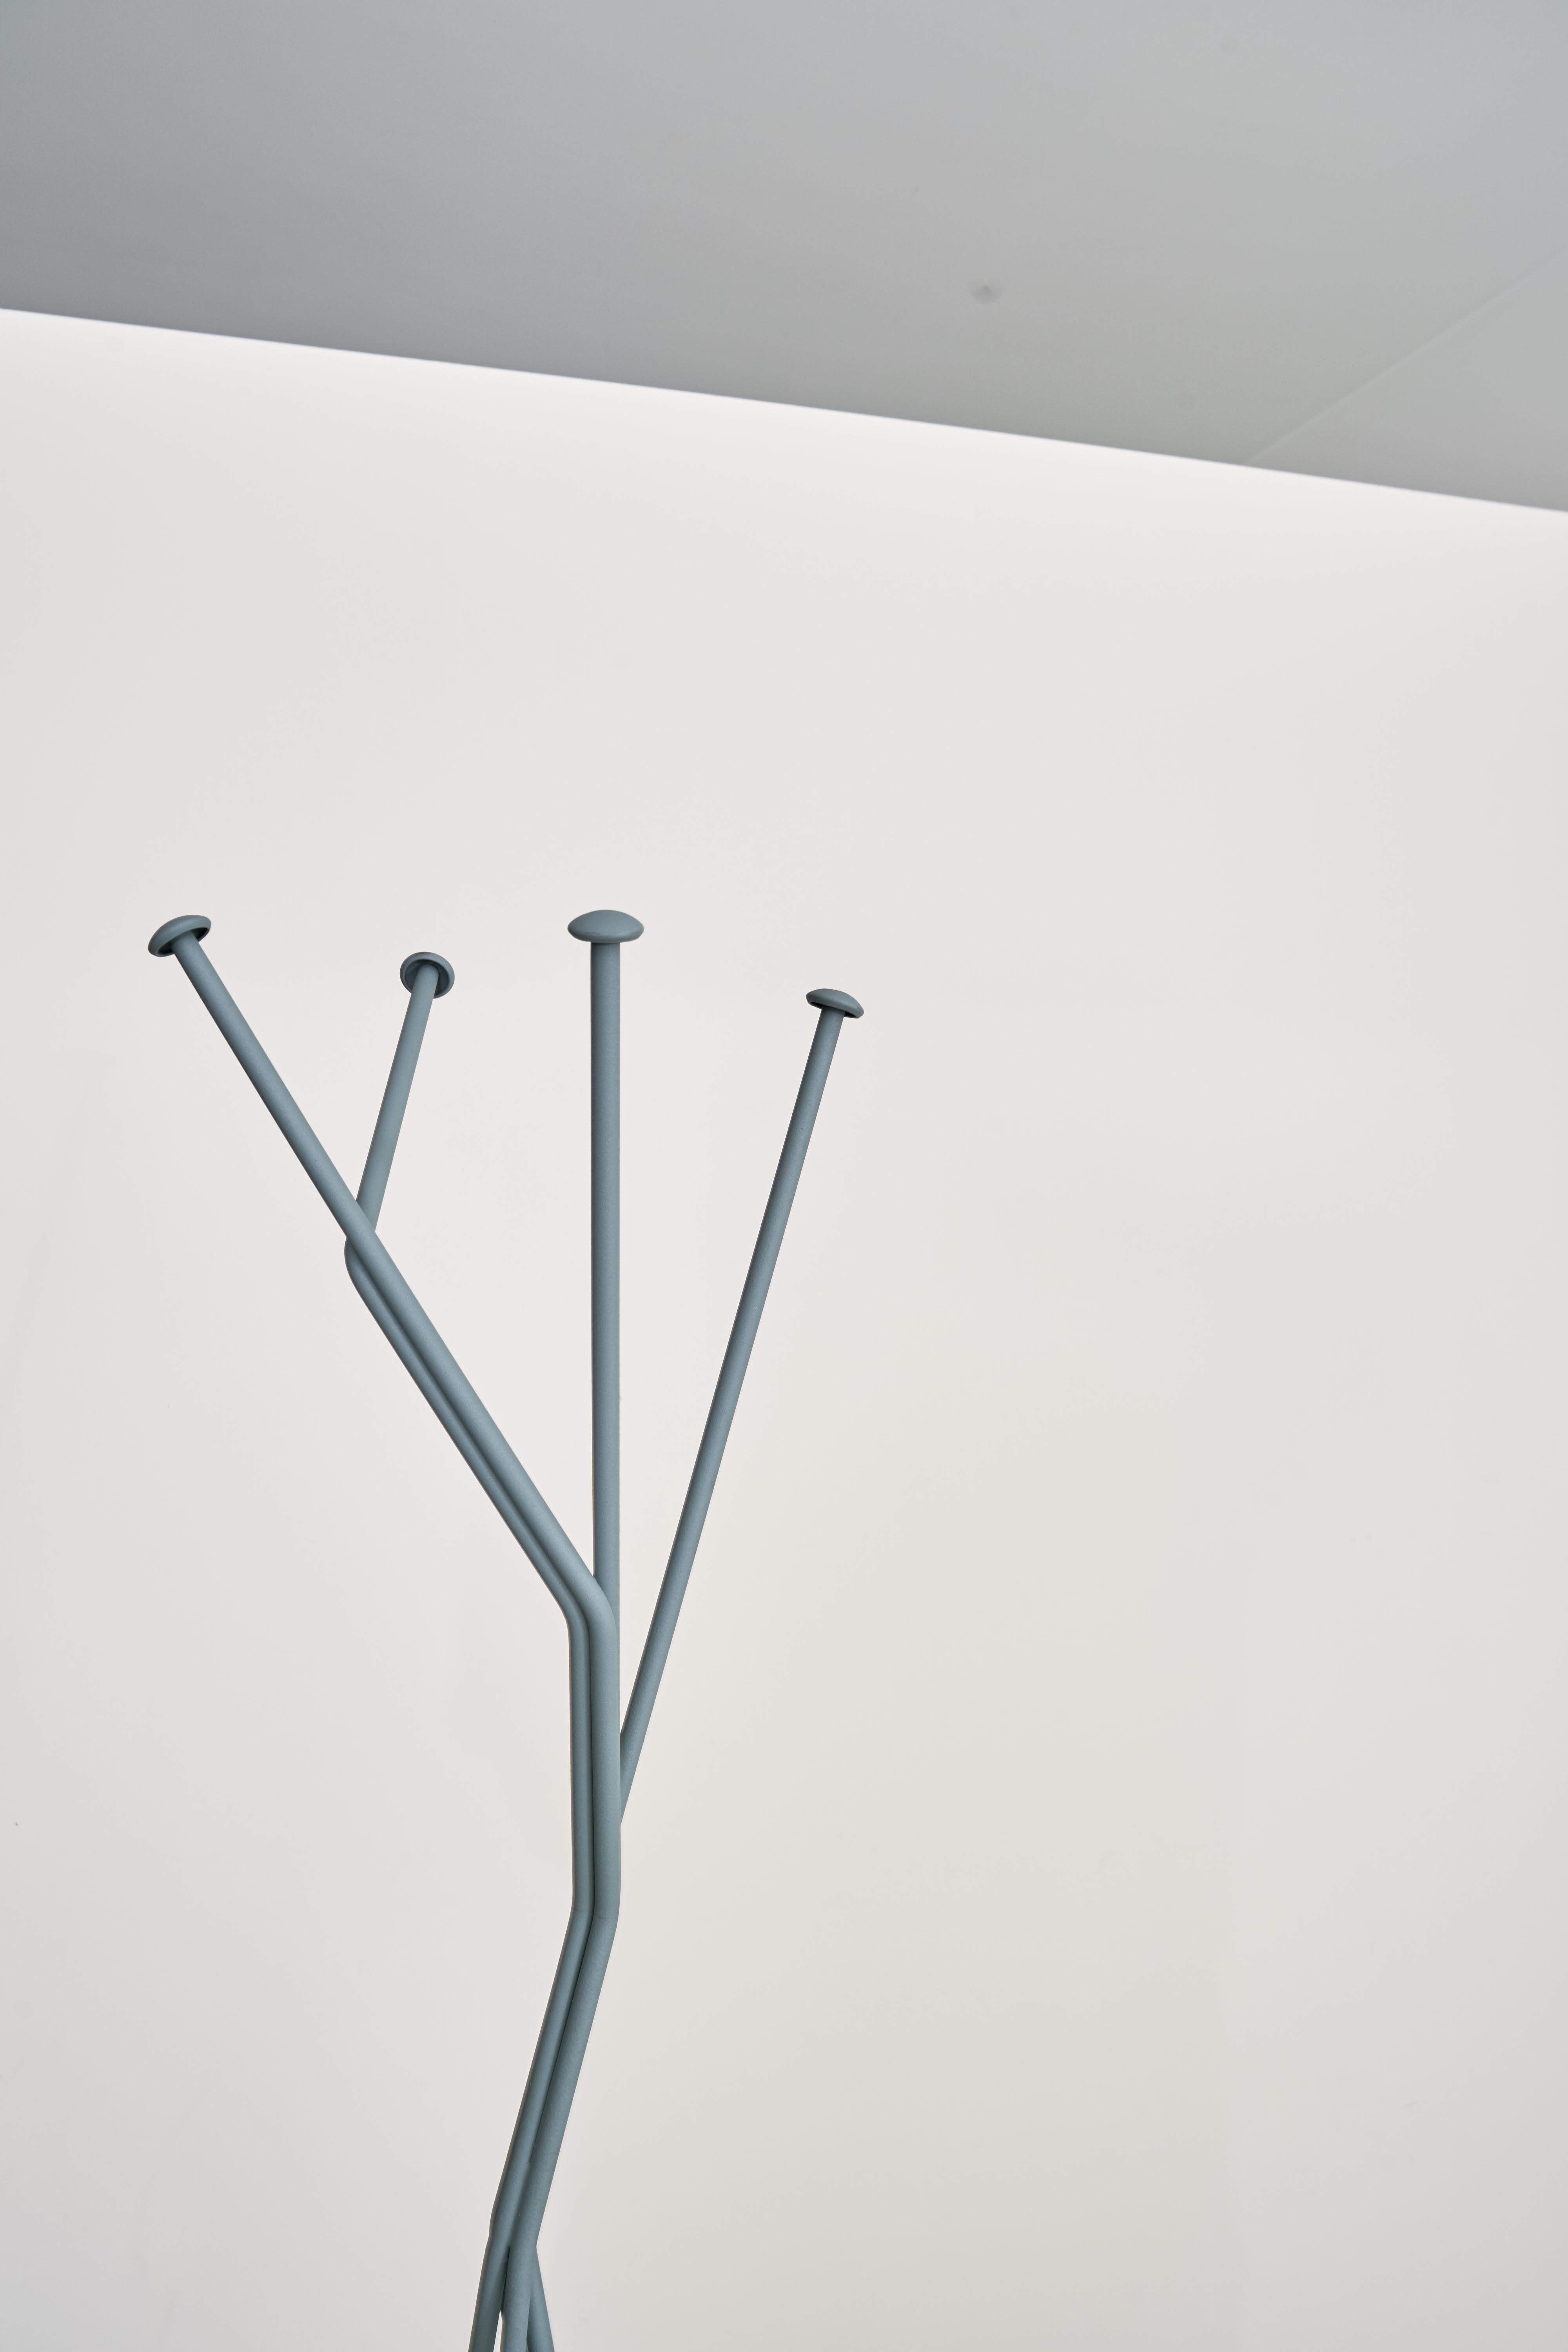 Fib hanger by LapiegaWD
Designed by Enrico Girotti
Materials: Powder coated metal.
Dimensions: D 60 x H 175 cm.
Available in other finishes.

FIB is the creation in space of a geometric path that connects the points generated by the circle,